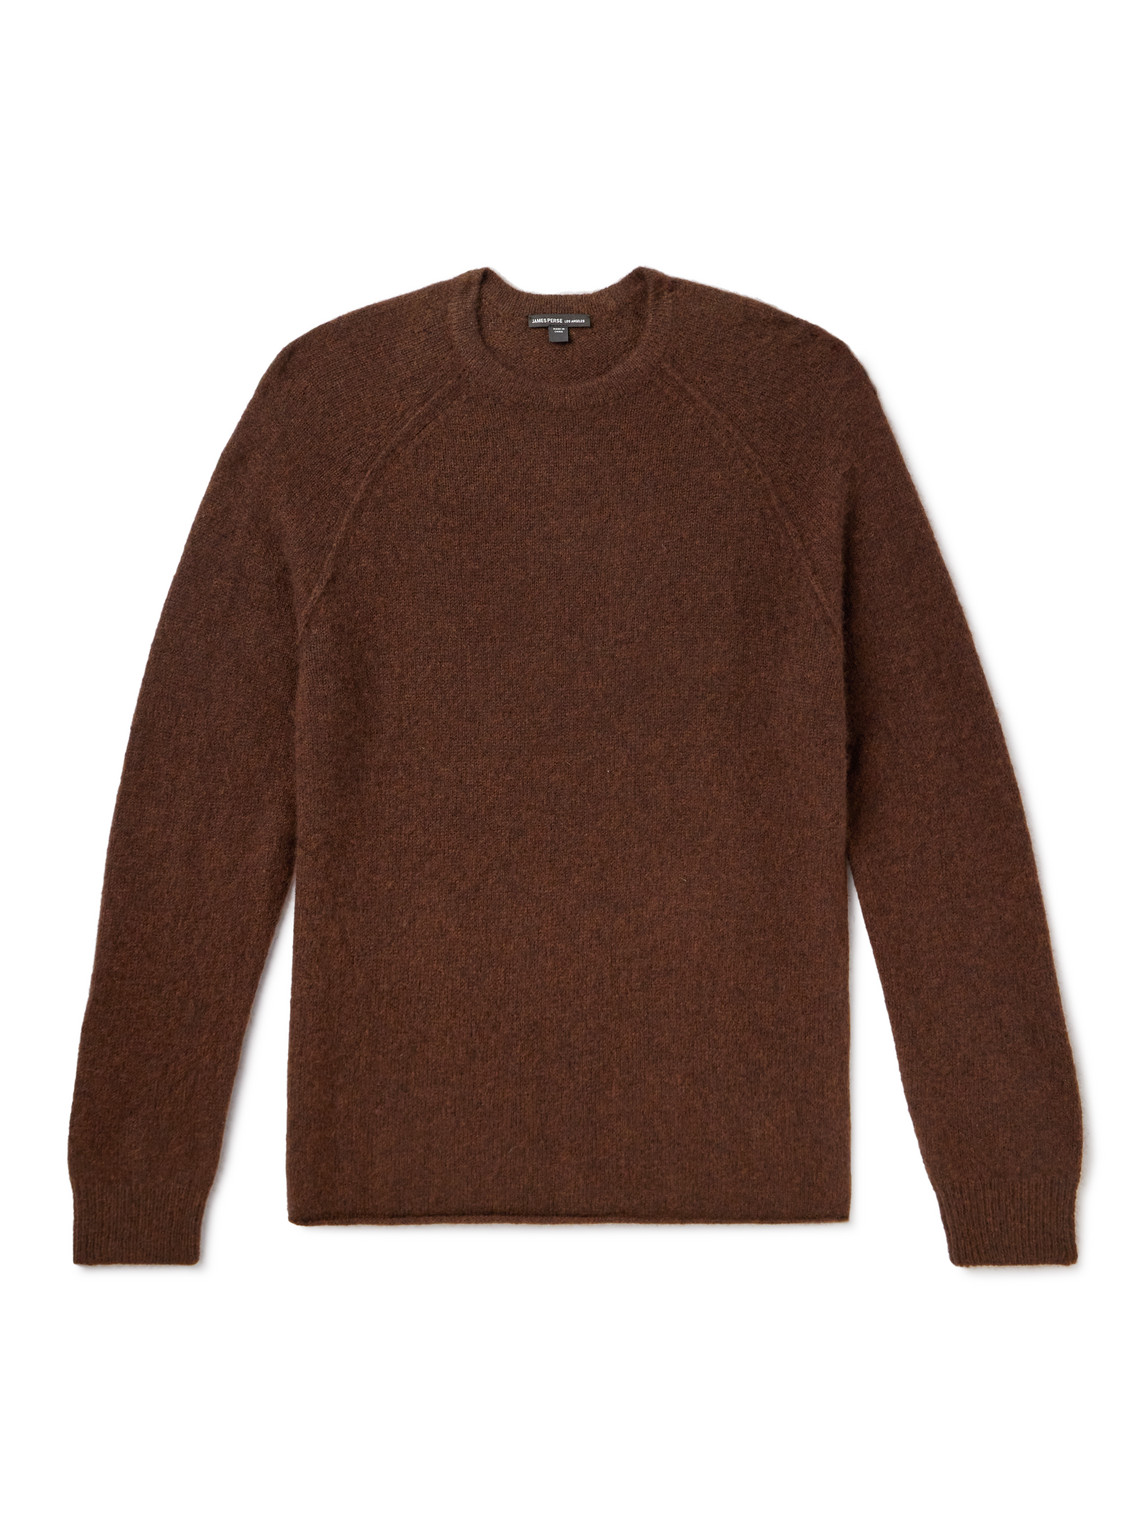 James Perse Cashmere Jumper In Brown